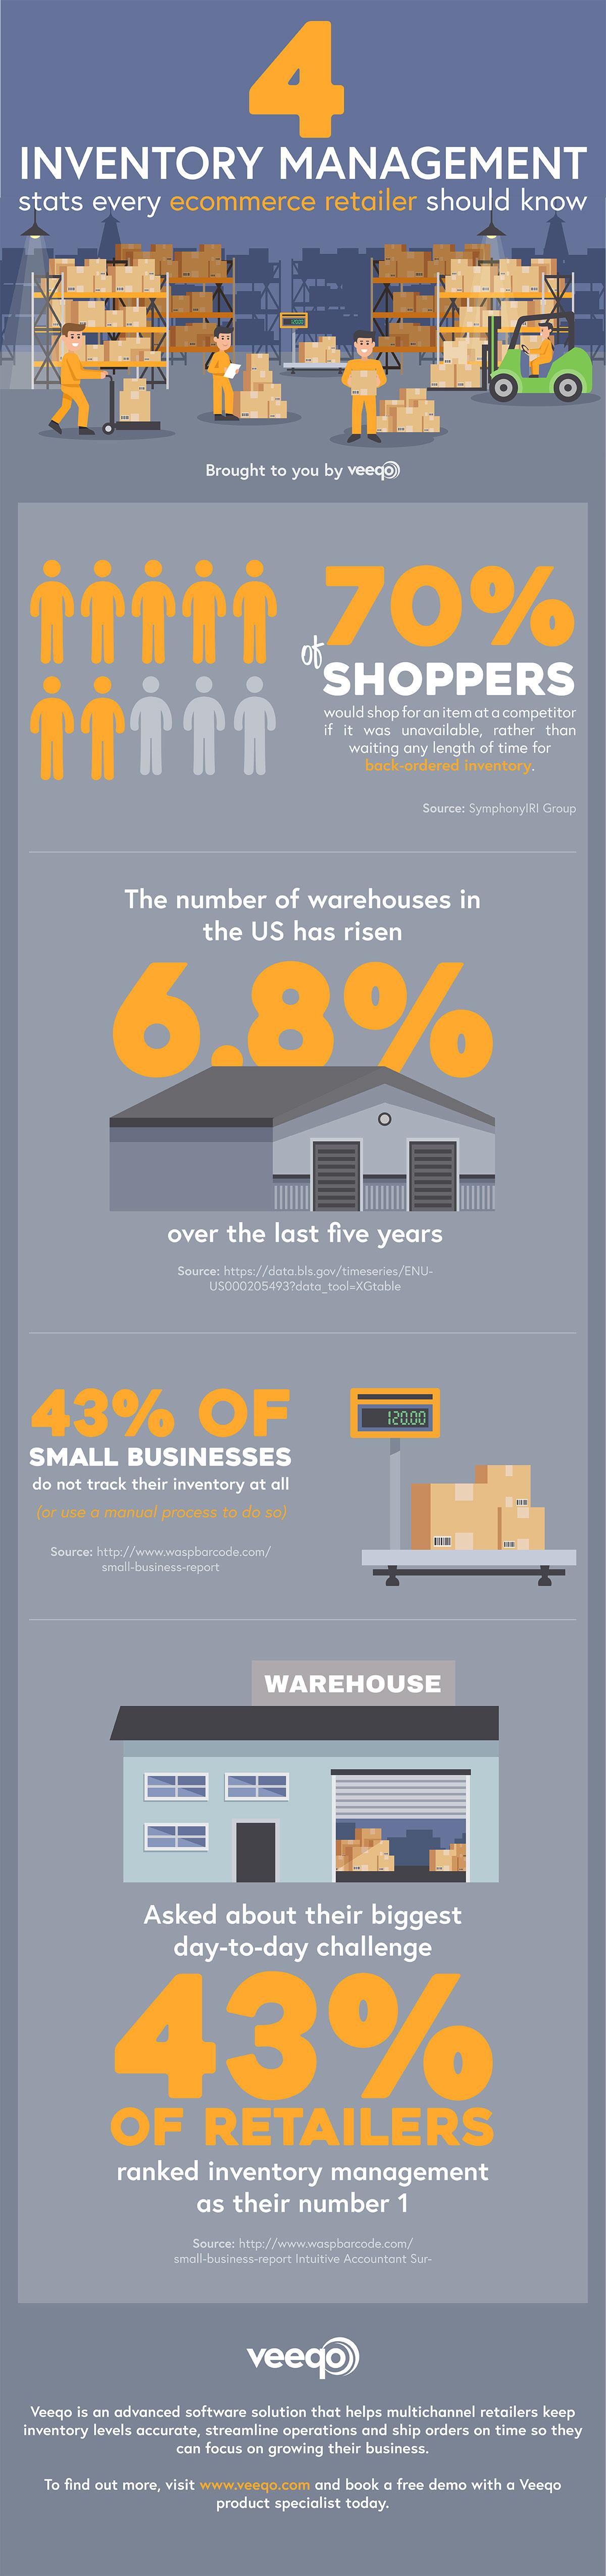 inventory-management-infographic